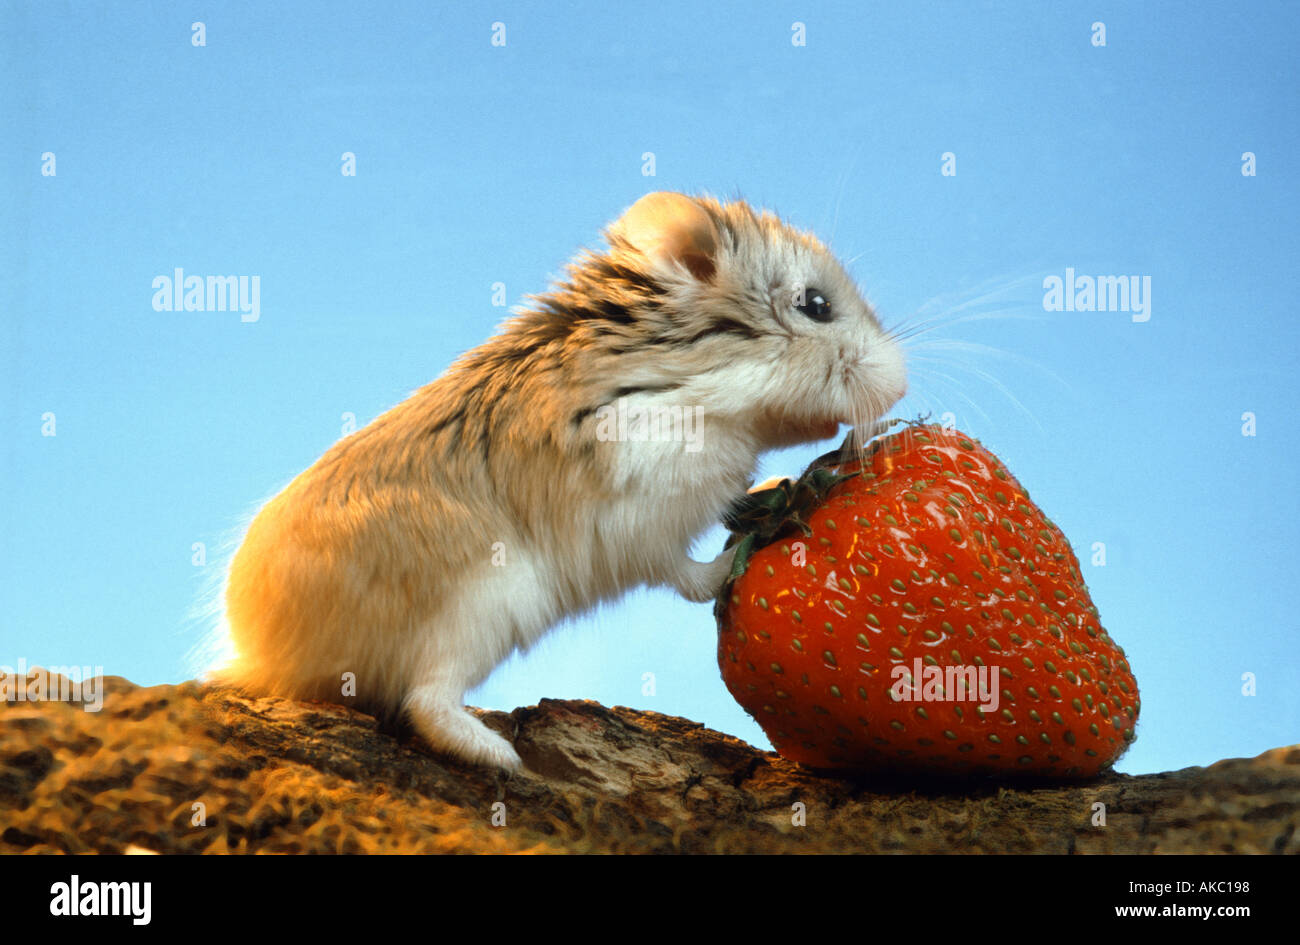 Roborowsky Hamster eating a strawberry red fruit Stock Photo